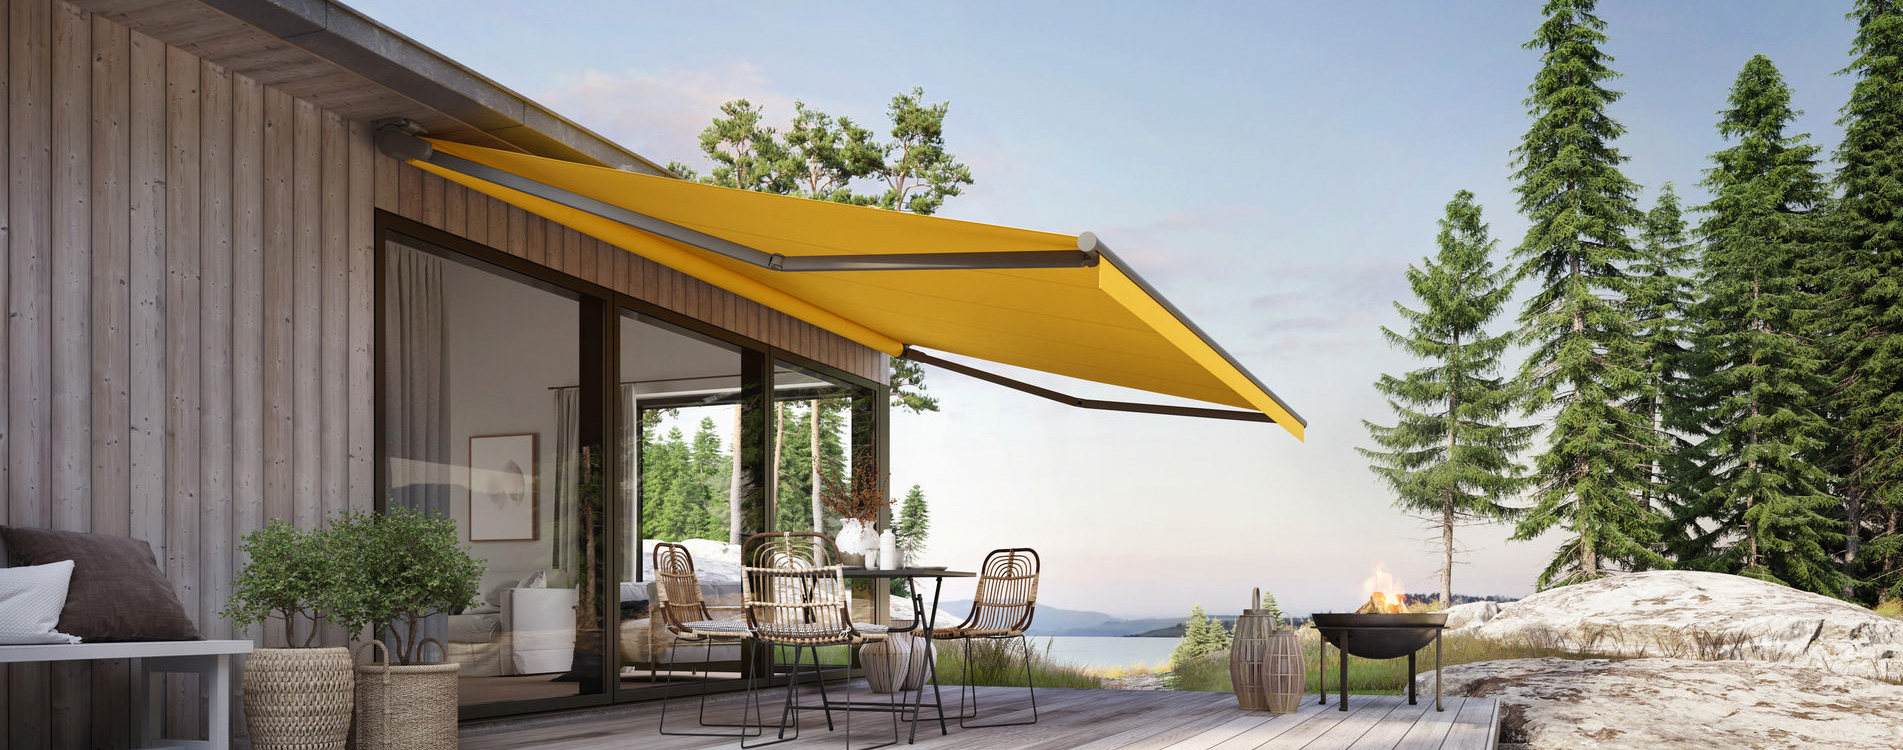 Markilux 930 patio awnings